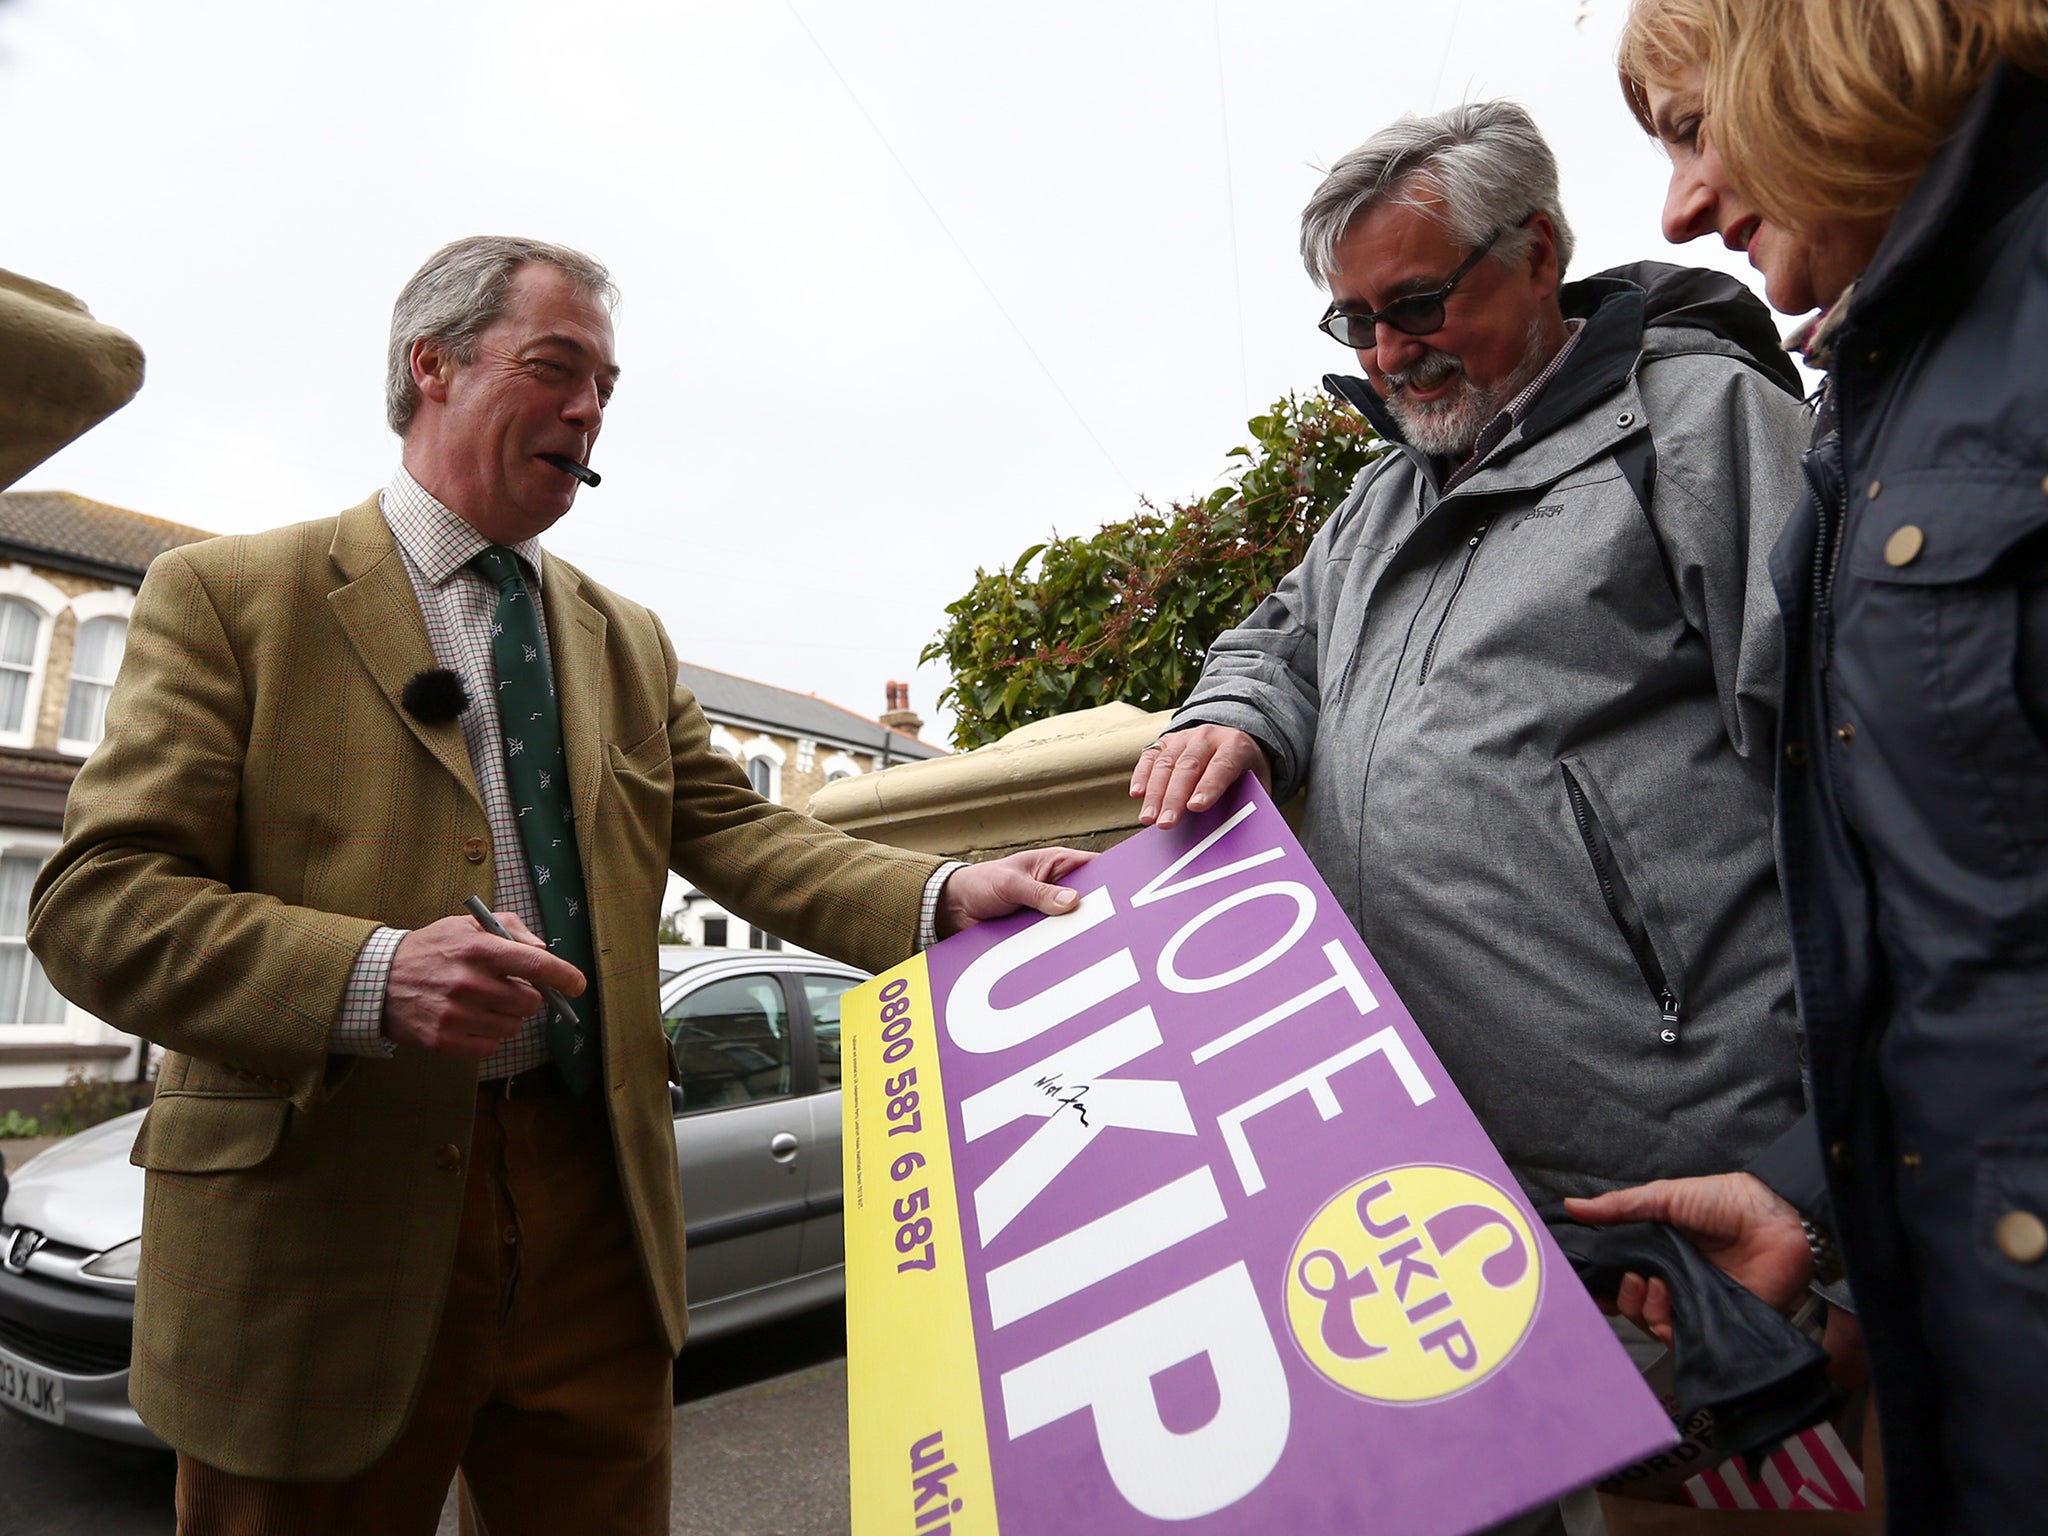 Nigel Farage had been buoyed earlier in the campign when a Survation telephone poll showed he was well ahead of his campaign rivals